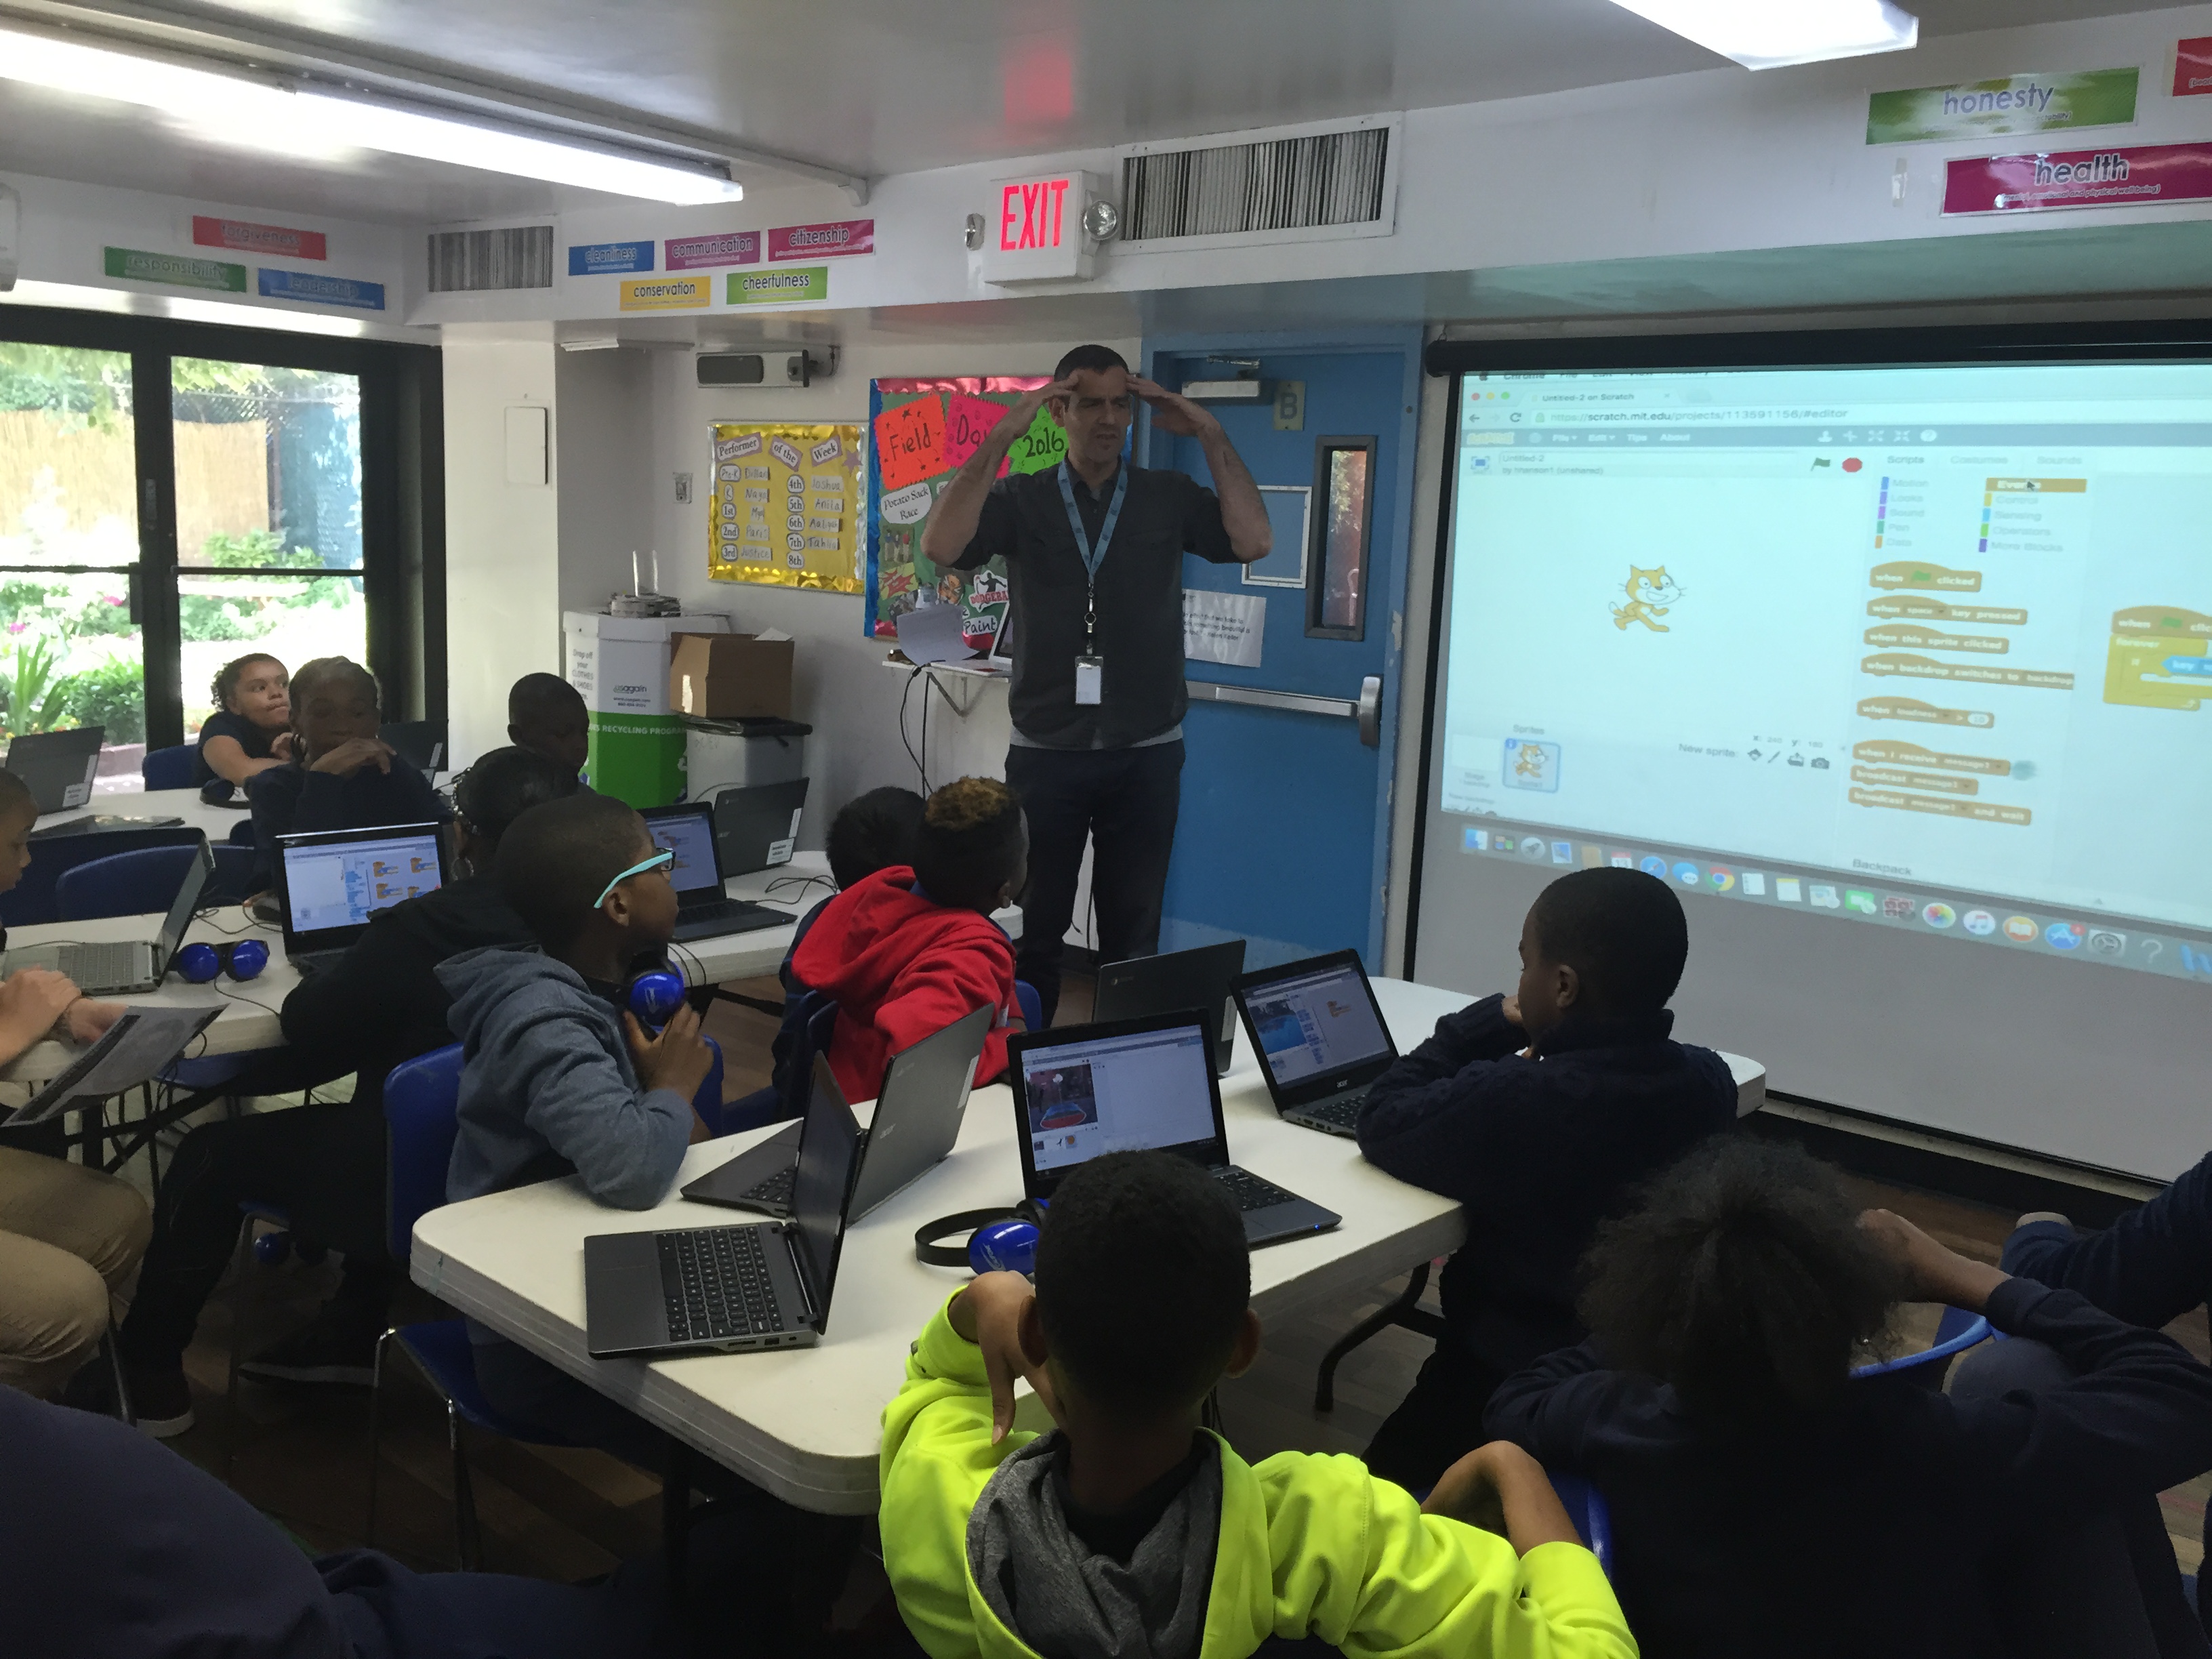 Students at Storefront Academy Harlem learn about coding with Scratch